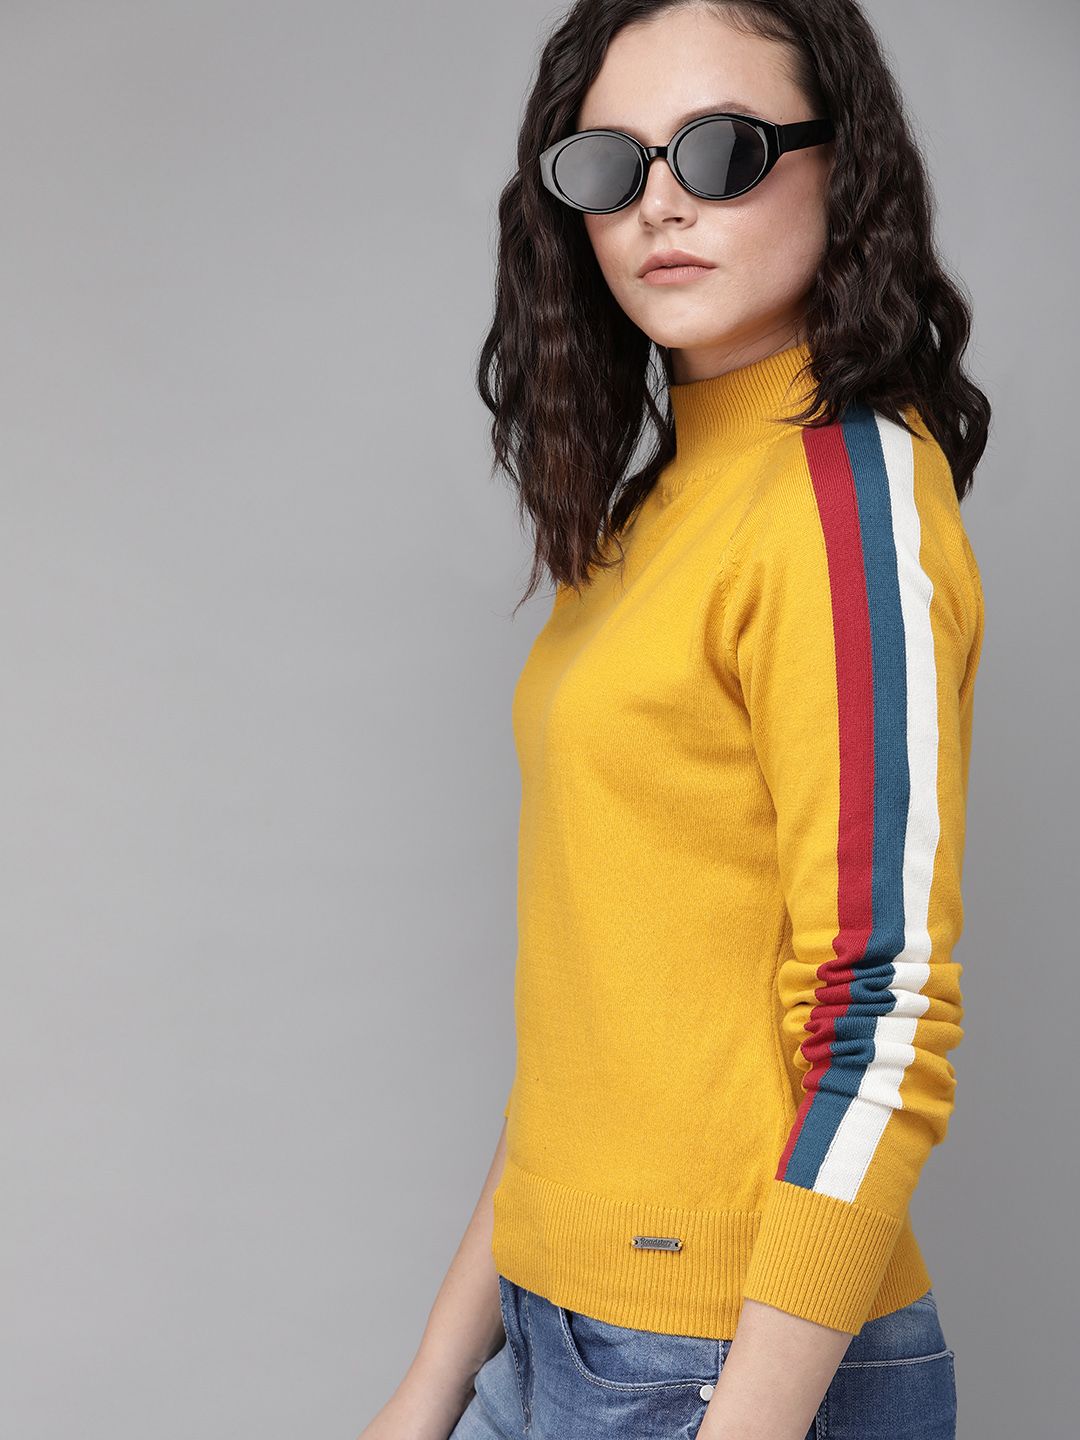 The Roadster Lifestyle Co Women Mustard Yellow Solid Knitted Top with Side Stripe Price in India